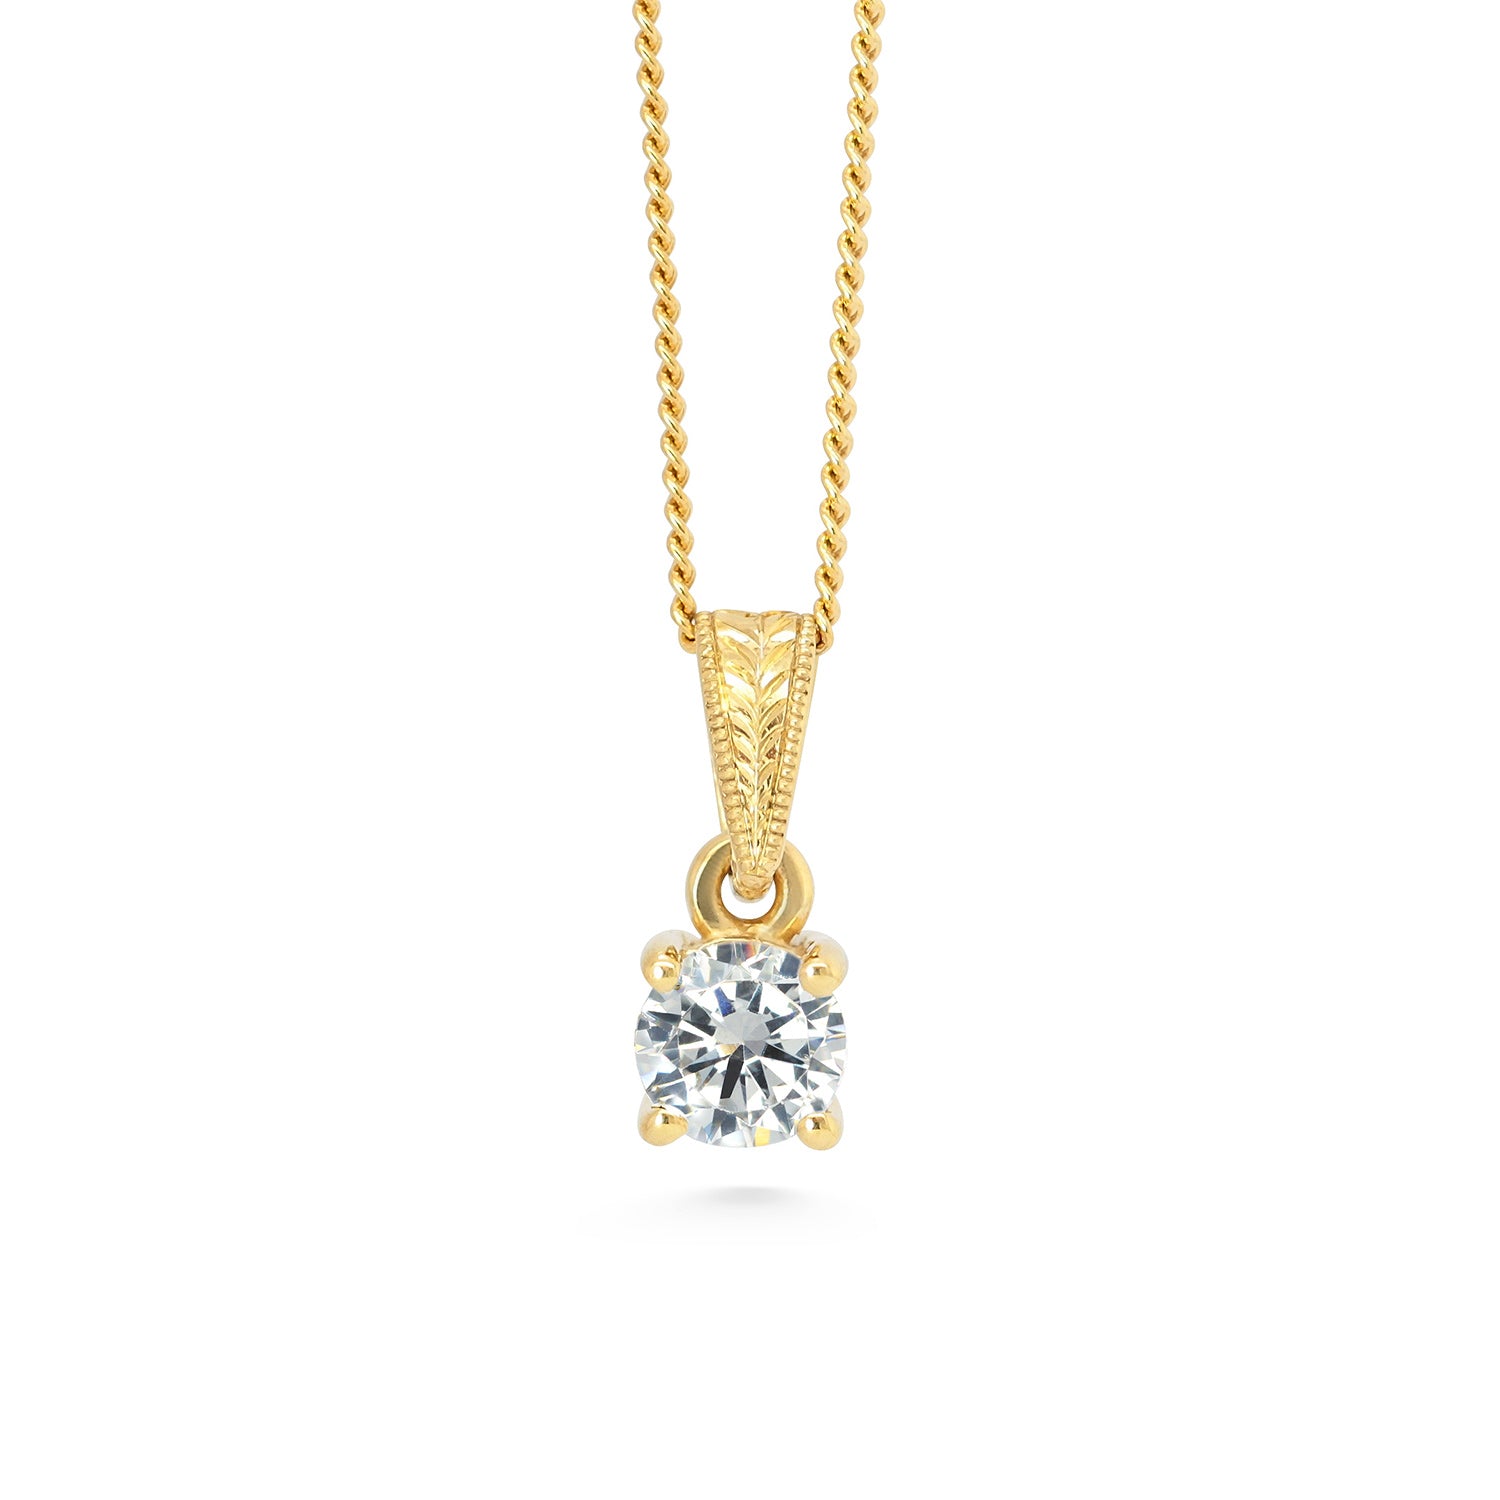 Perfectus Artisanal Gold and Recycled Diamond Claw-set Pendant Necklace